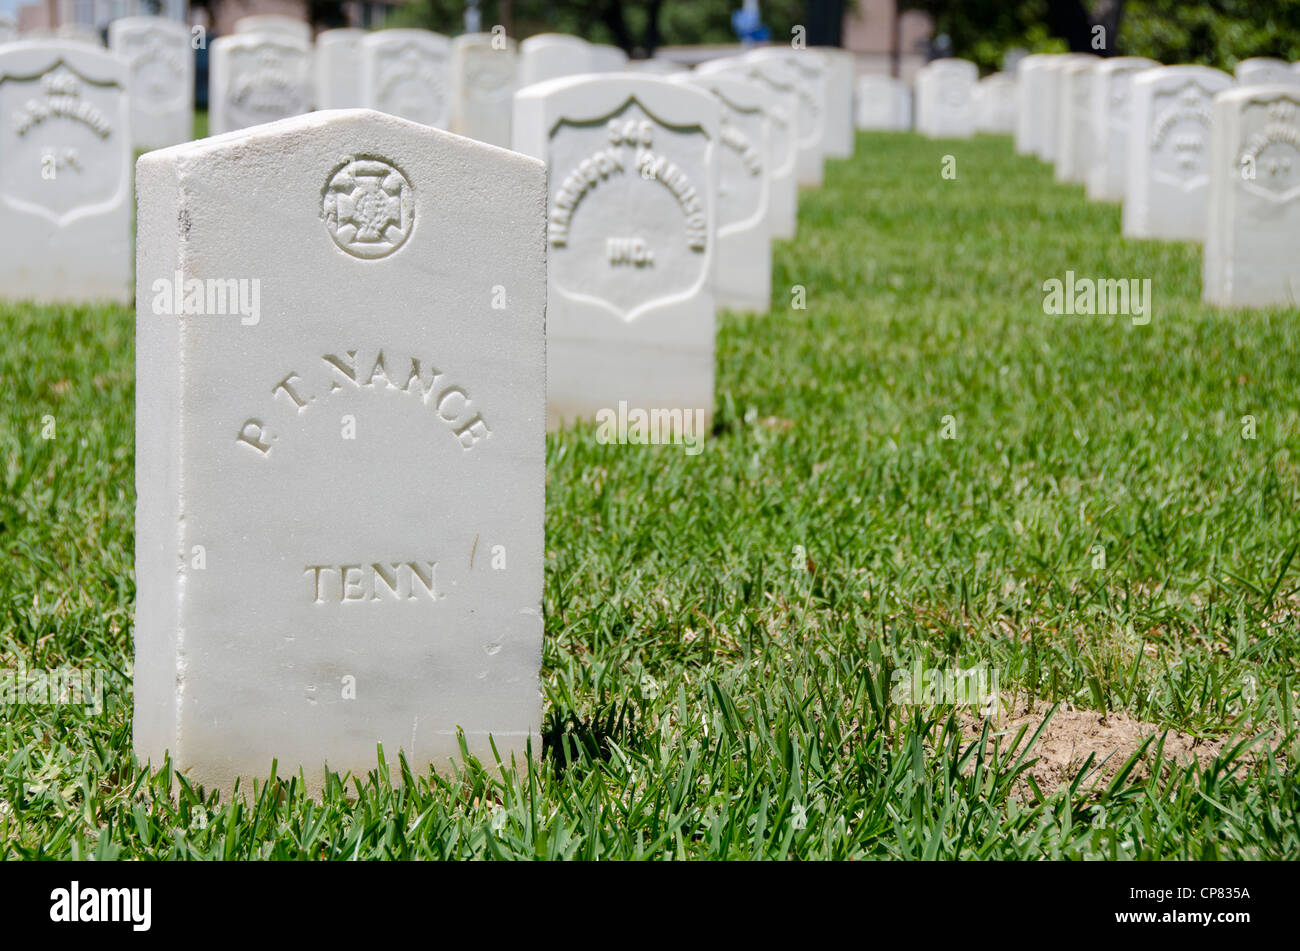 Louisiana, Baton Rouge. National Cemetery, established in 1867. One of the few confederate grave markers. Stock Photo